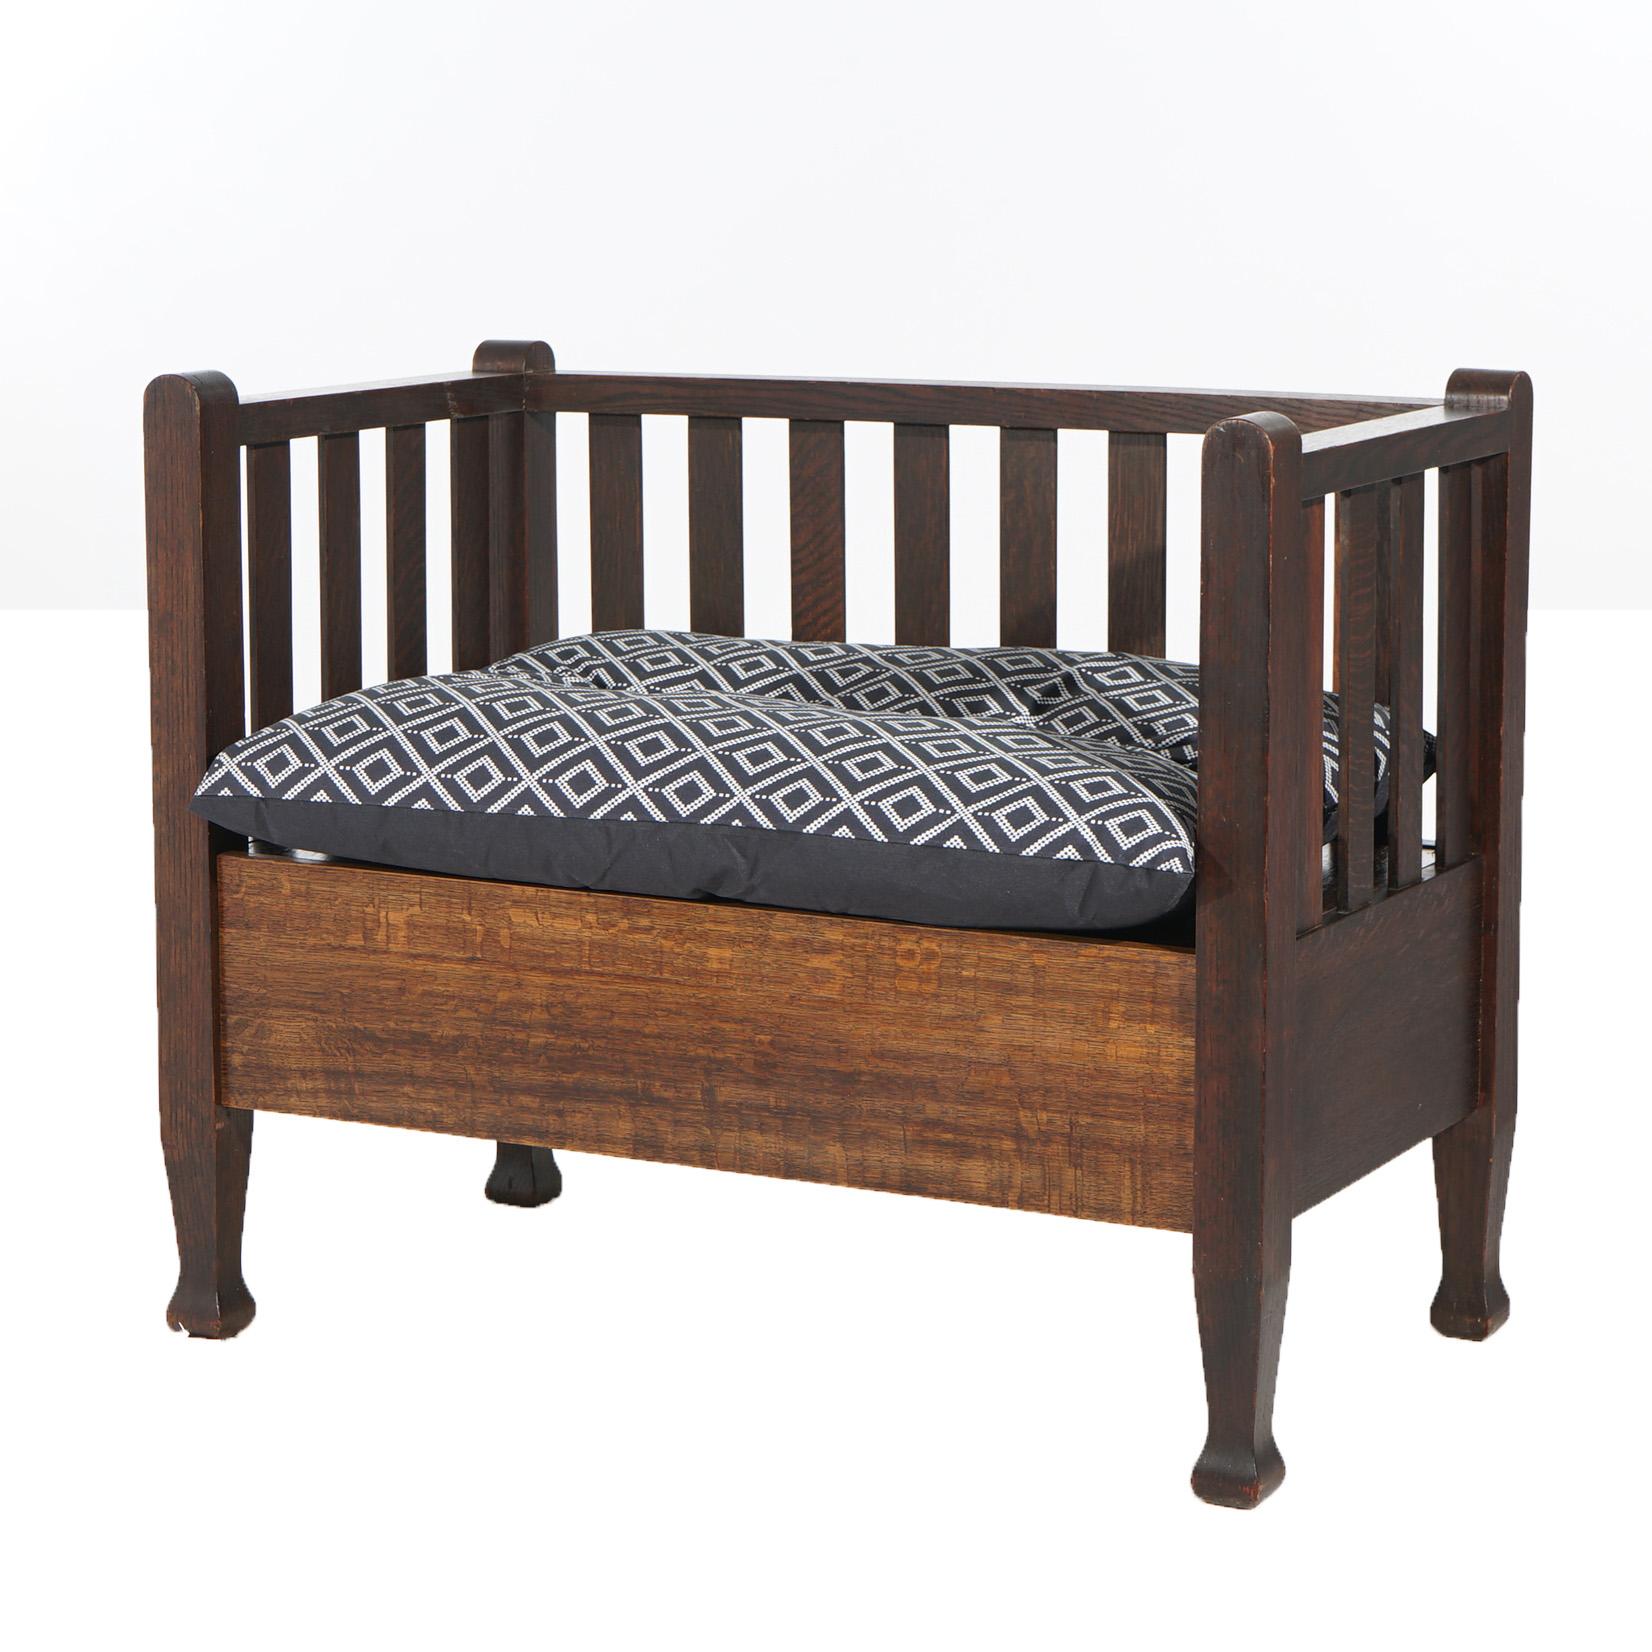 ***Ask About Discounted In-House Shipping***
An Arts and Crafts Mission hall bench in the manner of Roycroft offers quarter sawn oak even-arm frame with upholstered seat, slat back and sides, Circa 1910

Measures - 32'h x 39